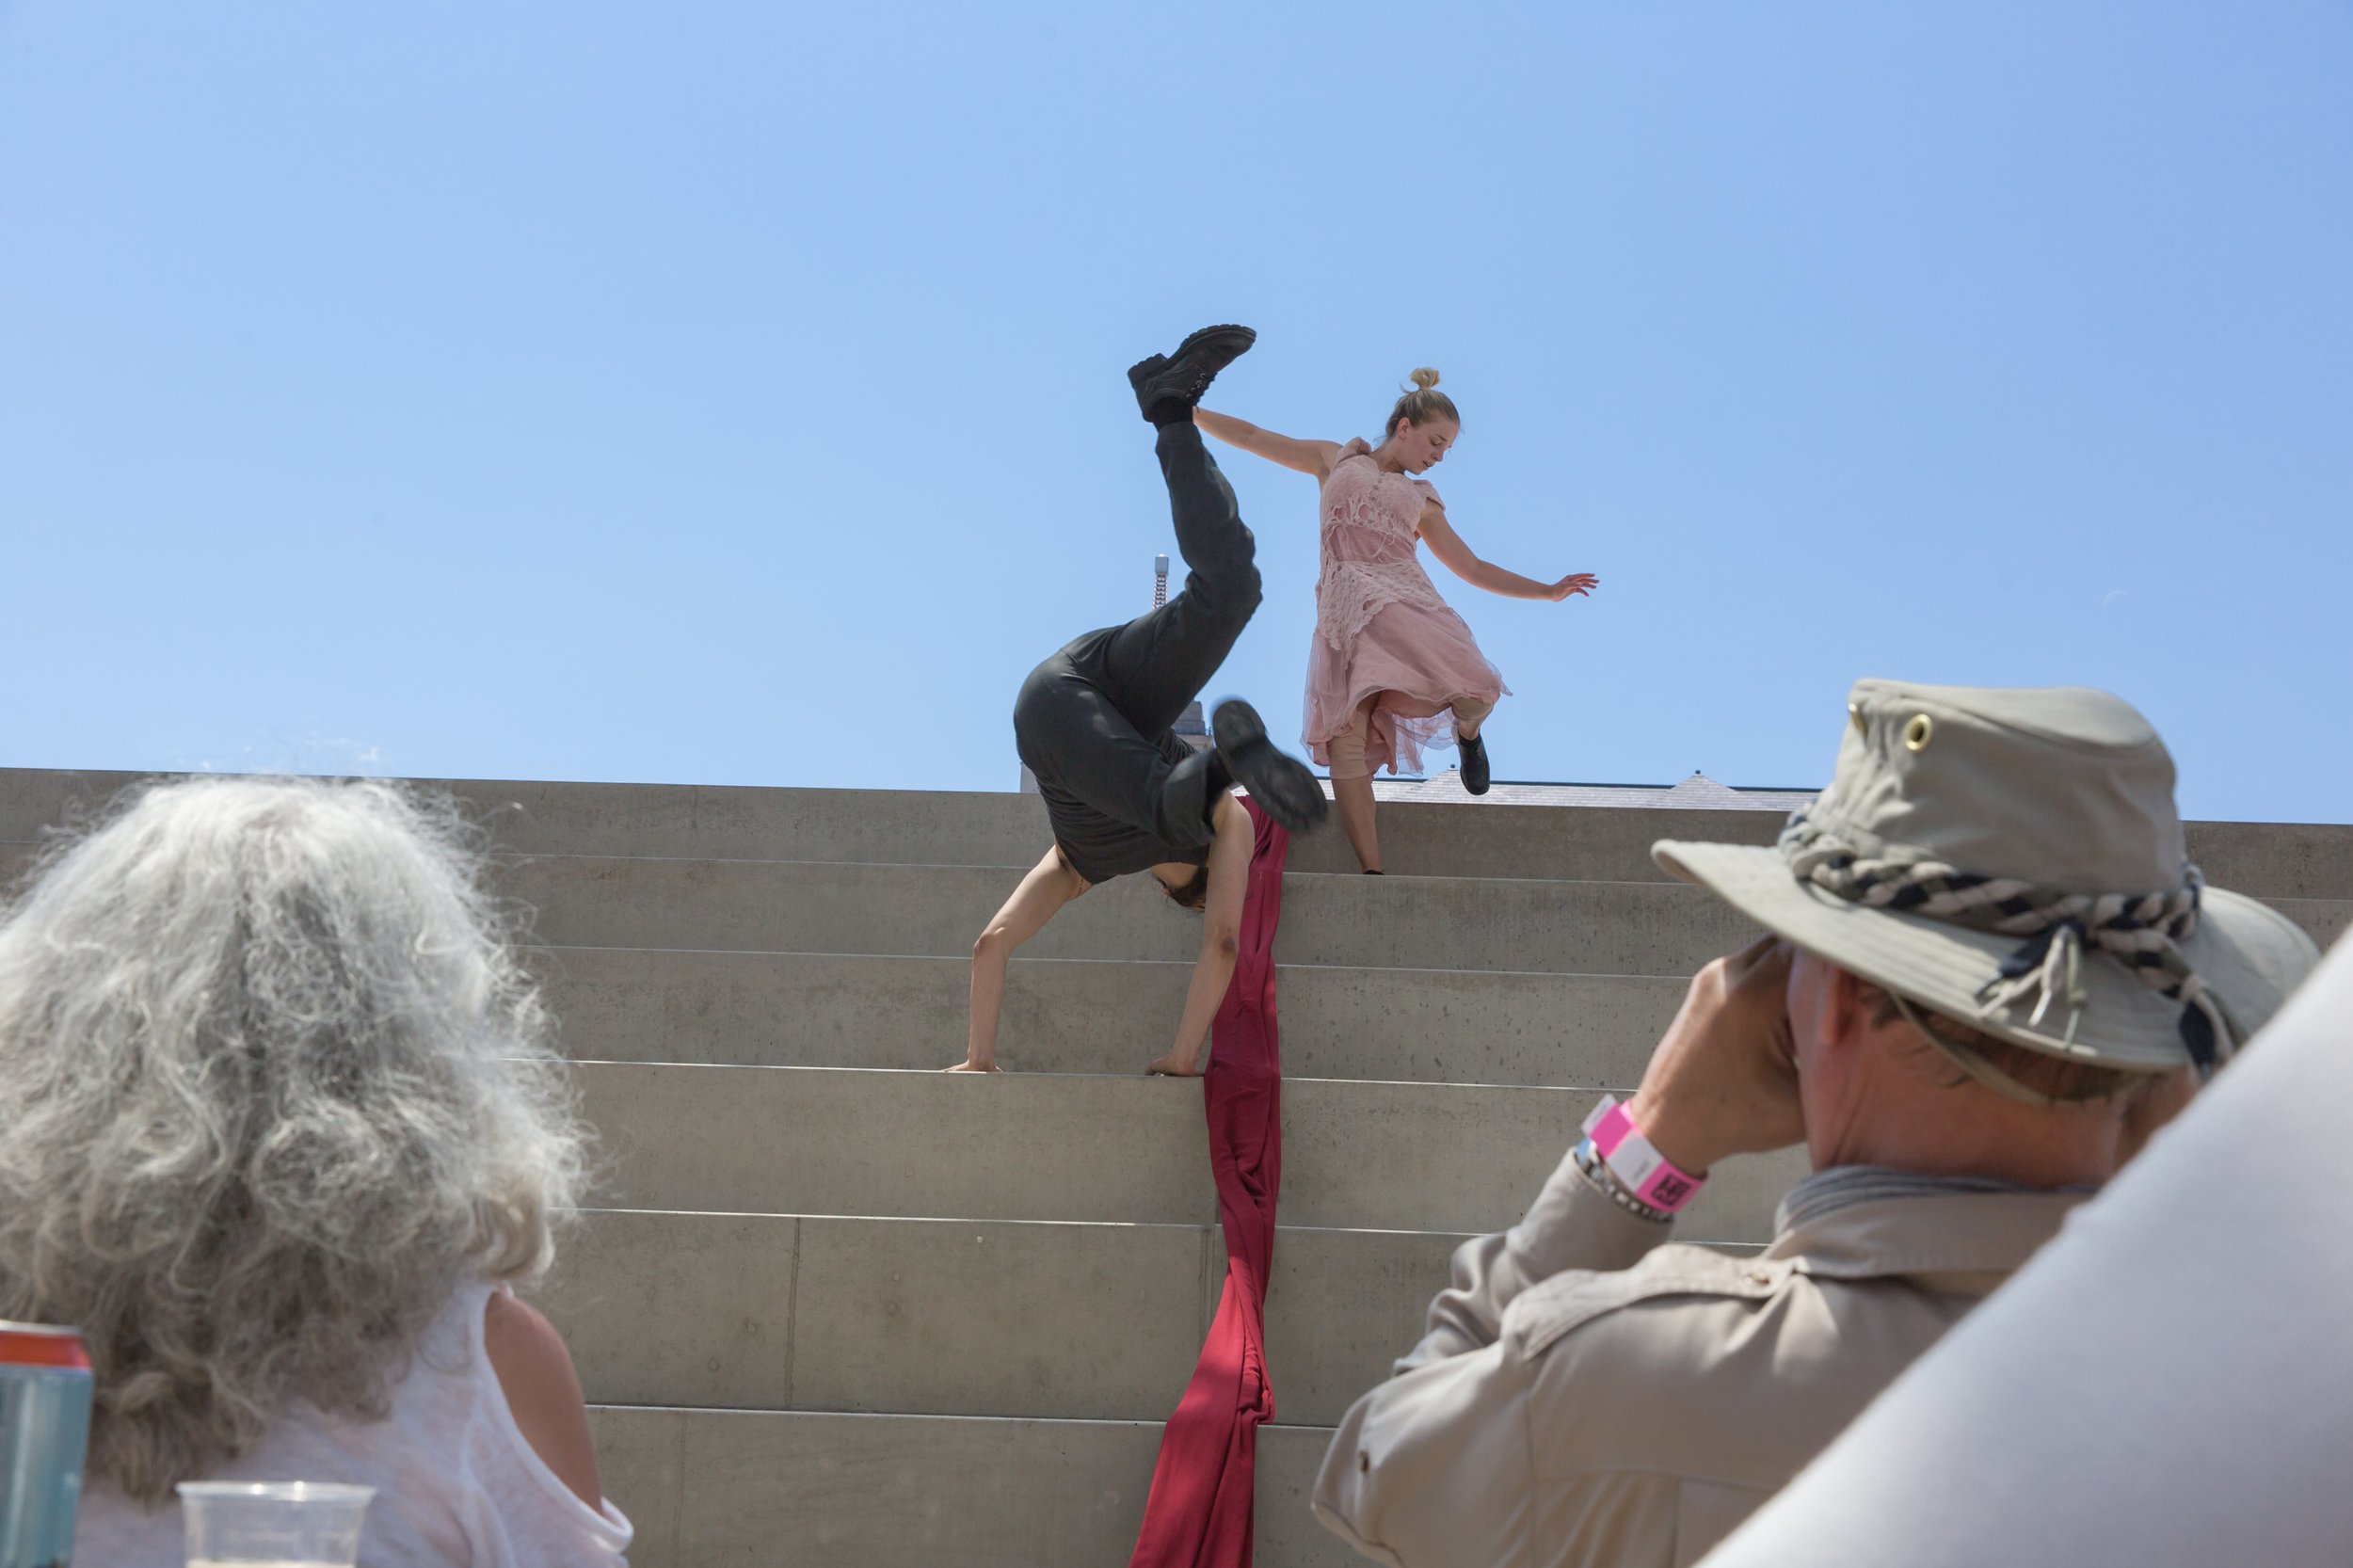 One dancer does a handstand on some steps while another runs down the steps.